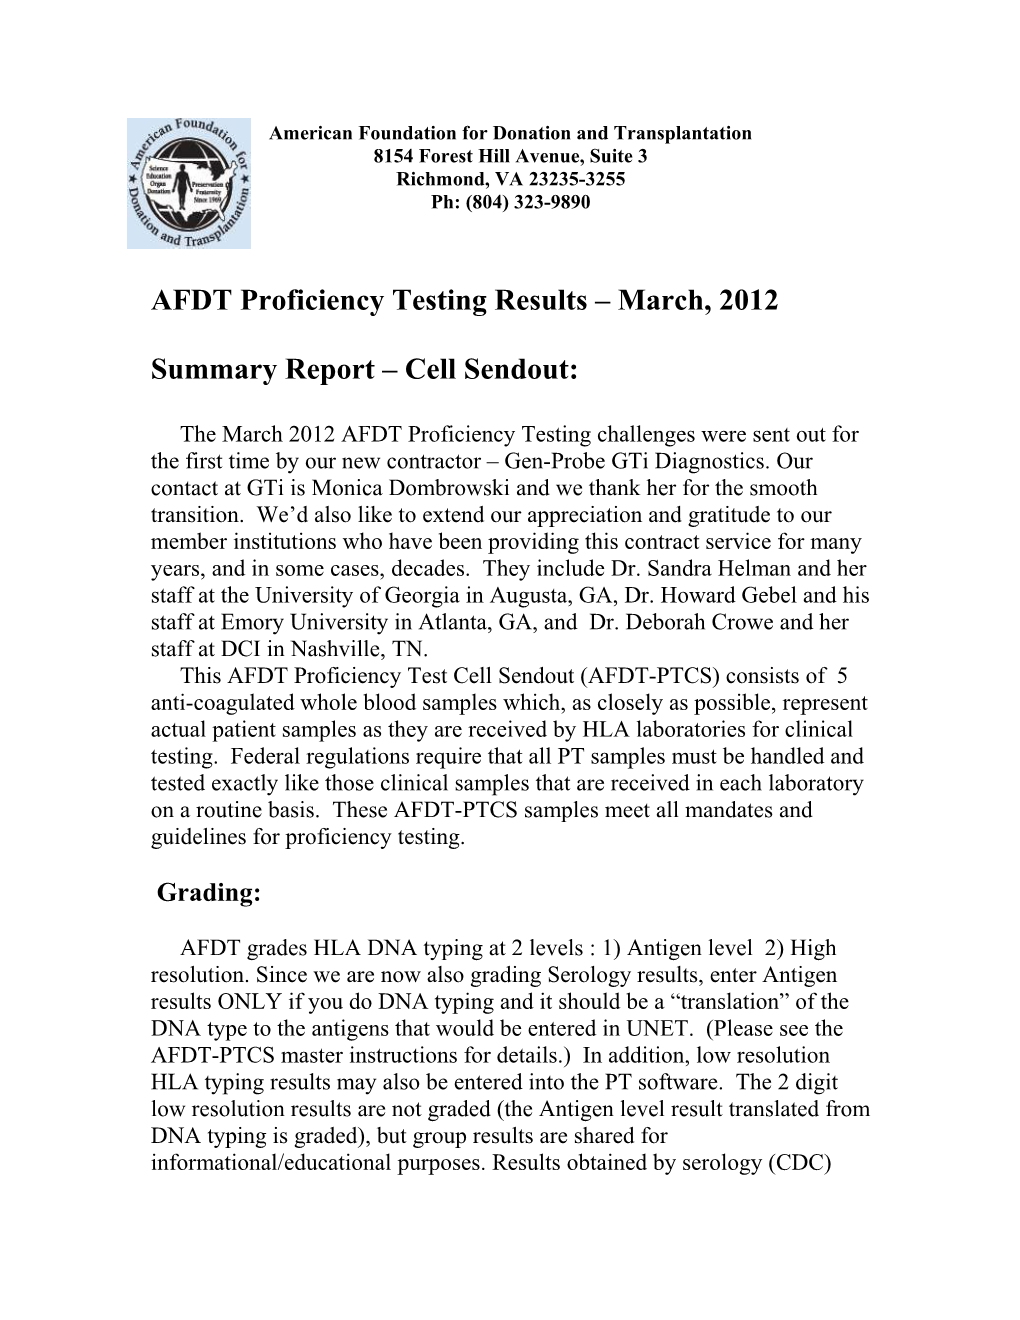 AFDT Proficiency Testing Results March, 2012